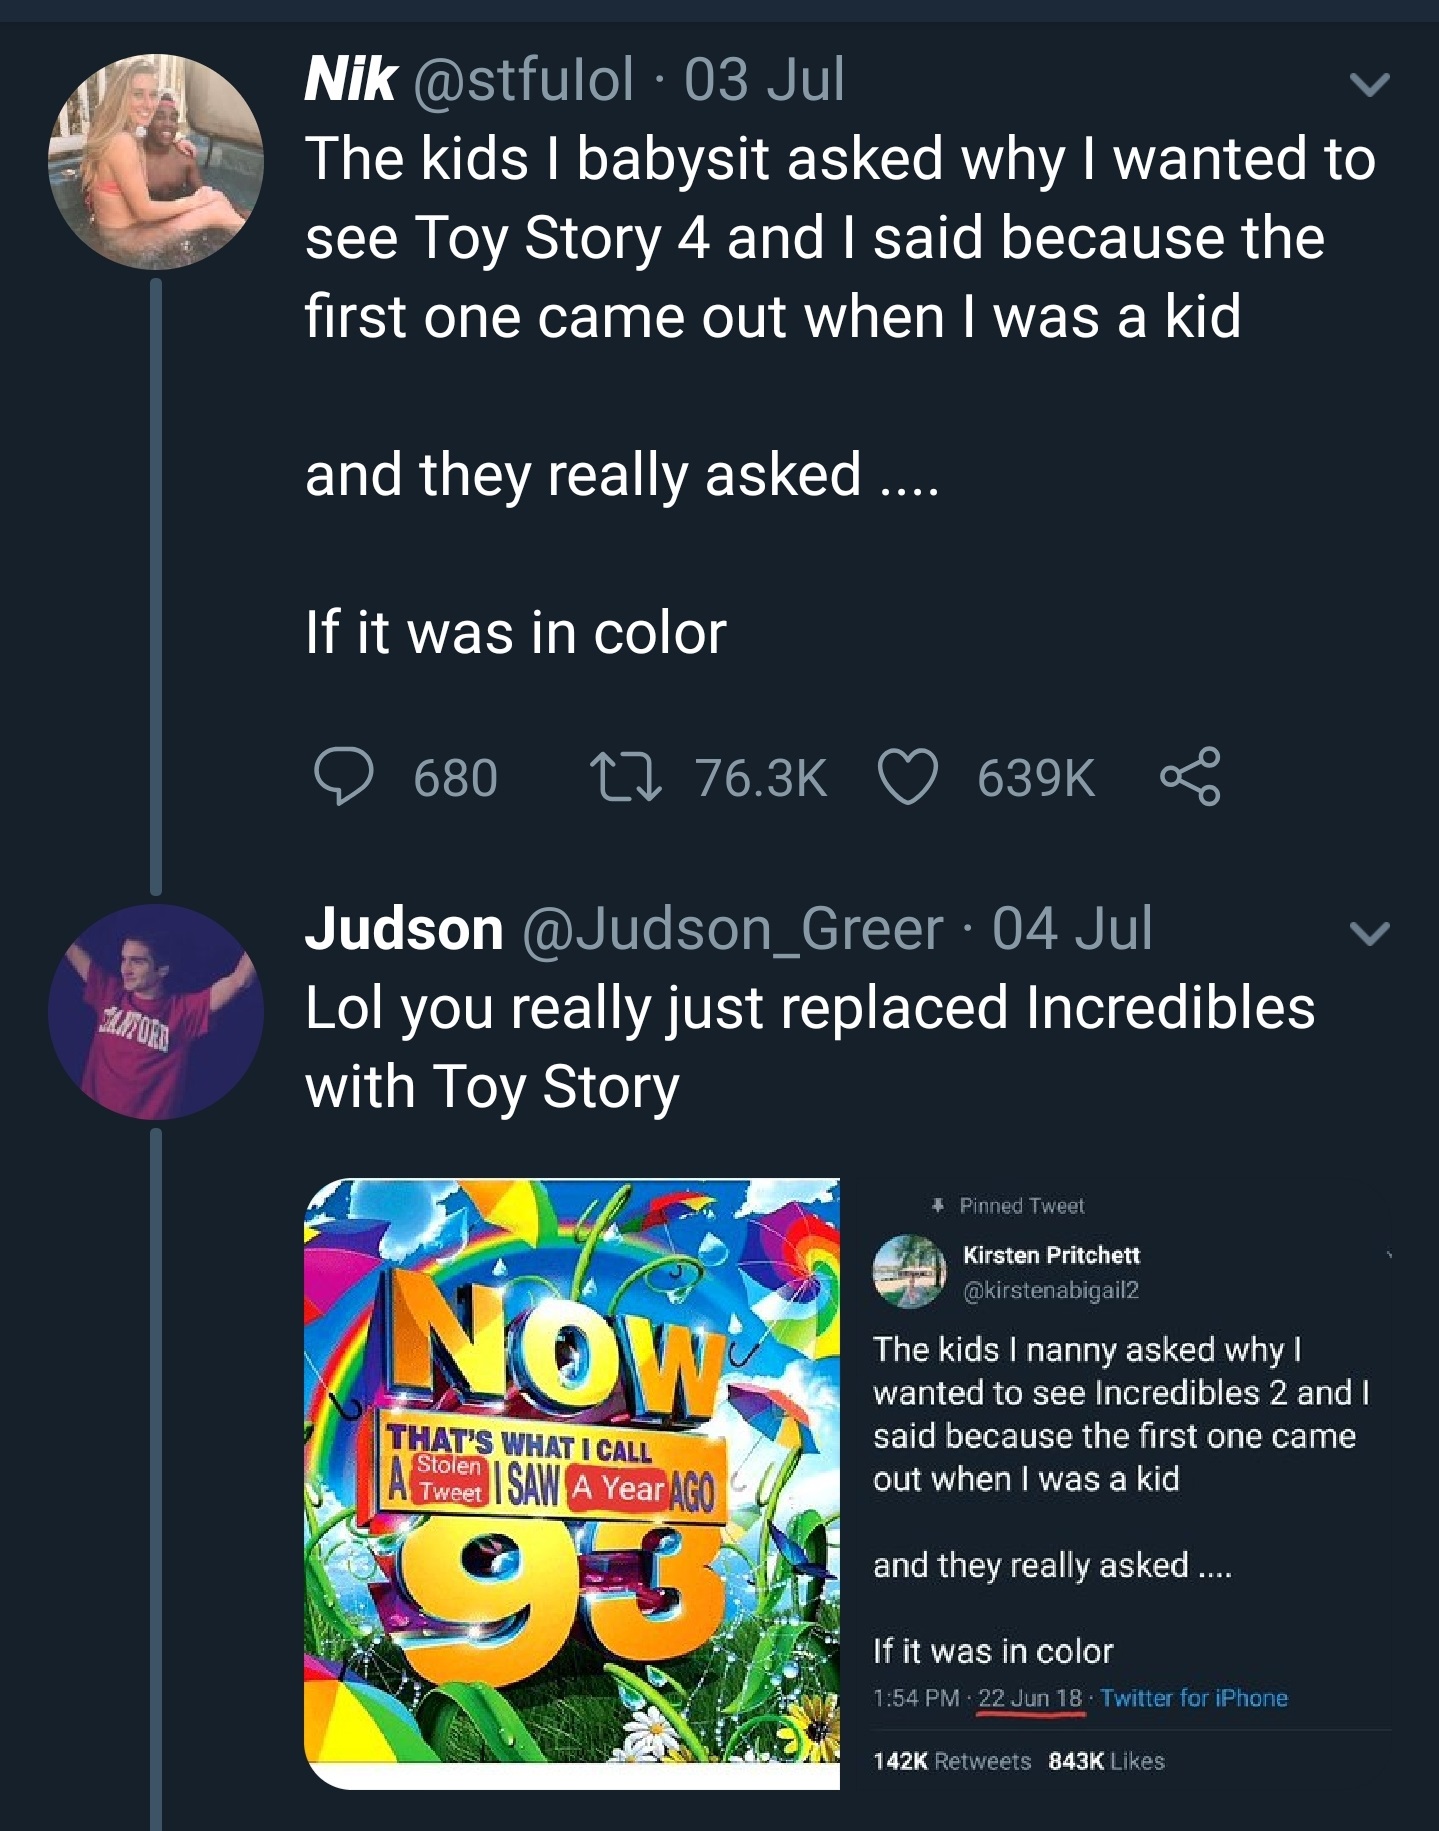 graphic design - Nik . 03 Jul The kids I babysit asked why I wanted to see Toy Story 4 and I said because the first one came out when I was a kid and they really asked .... If it was in color 680 2 V R Judson 04 Jul Lol you really just replaced Incredible